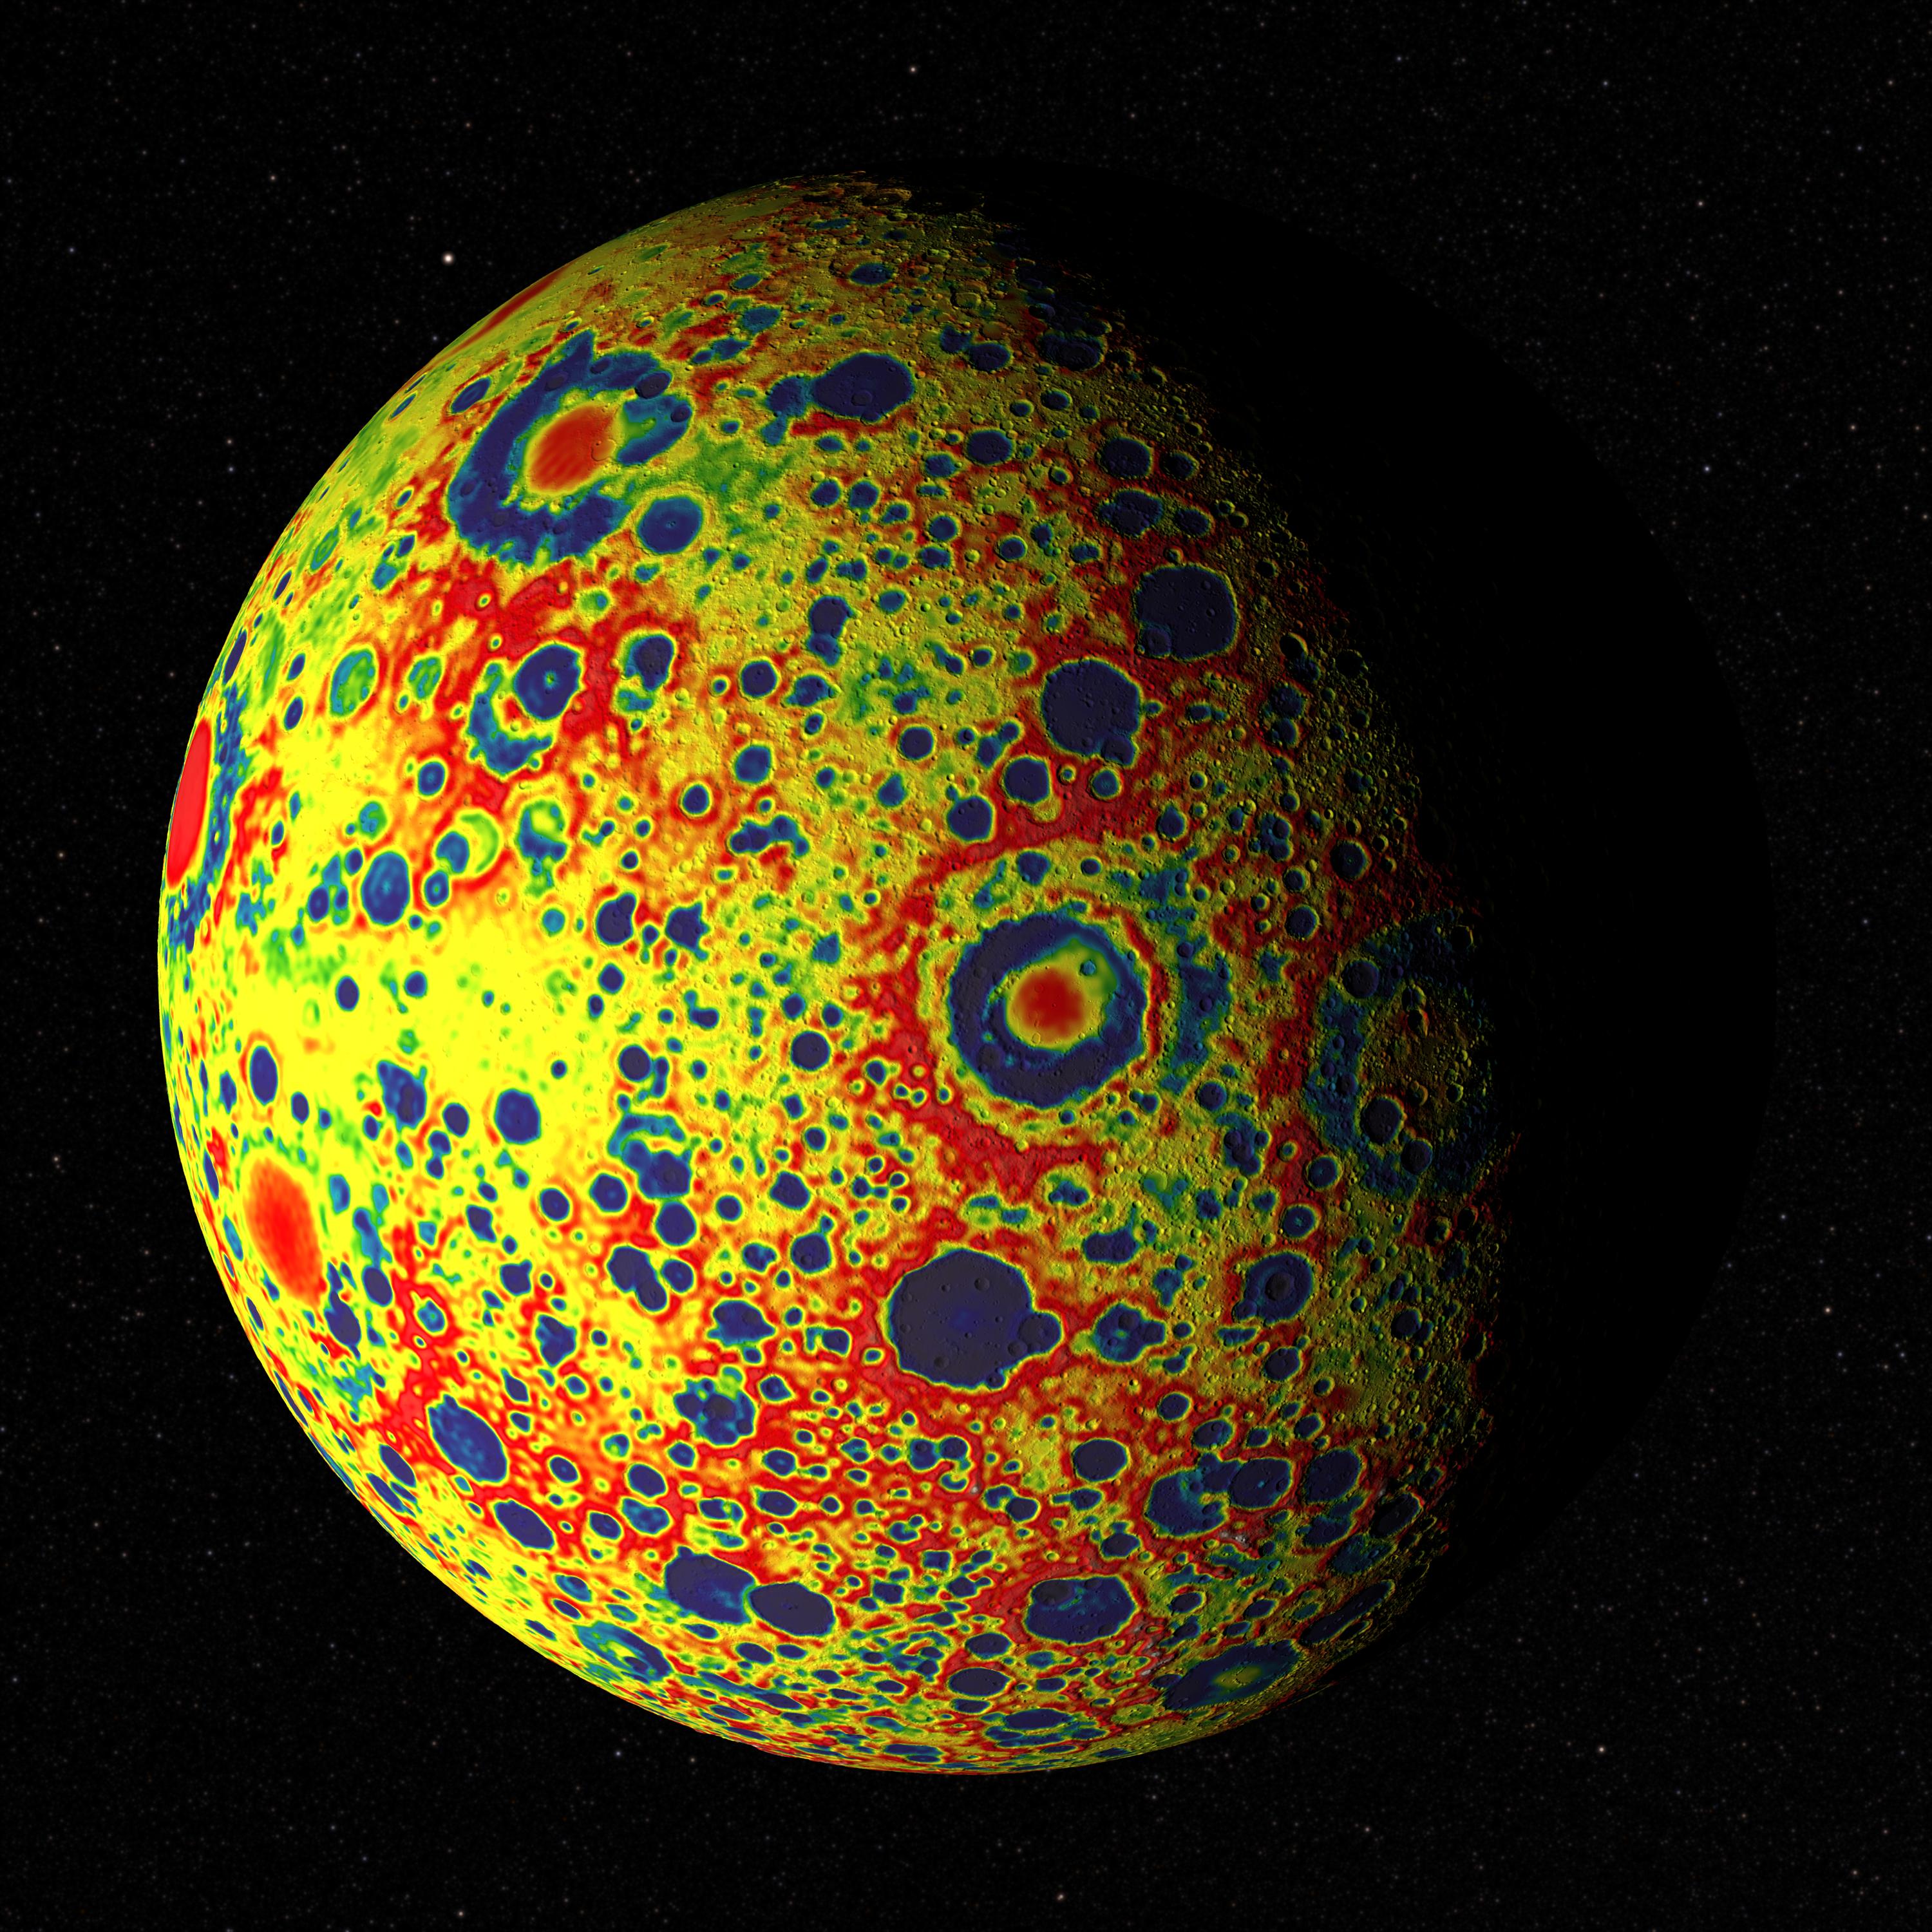 A color map of the Moon. The varying colors represent gravitational pull in each area. The map is a mixture of yellows, greens, blues, and reds.